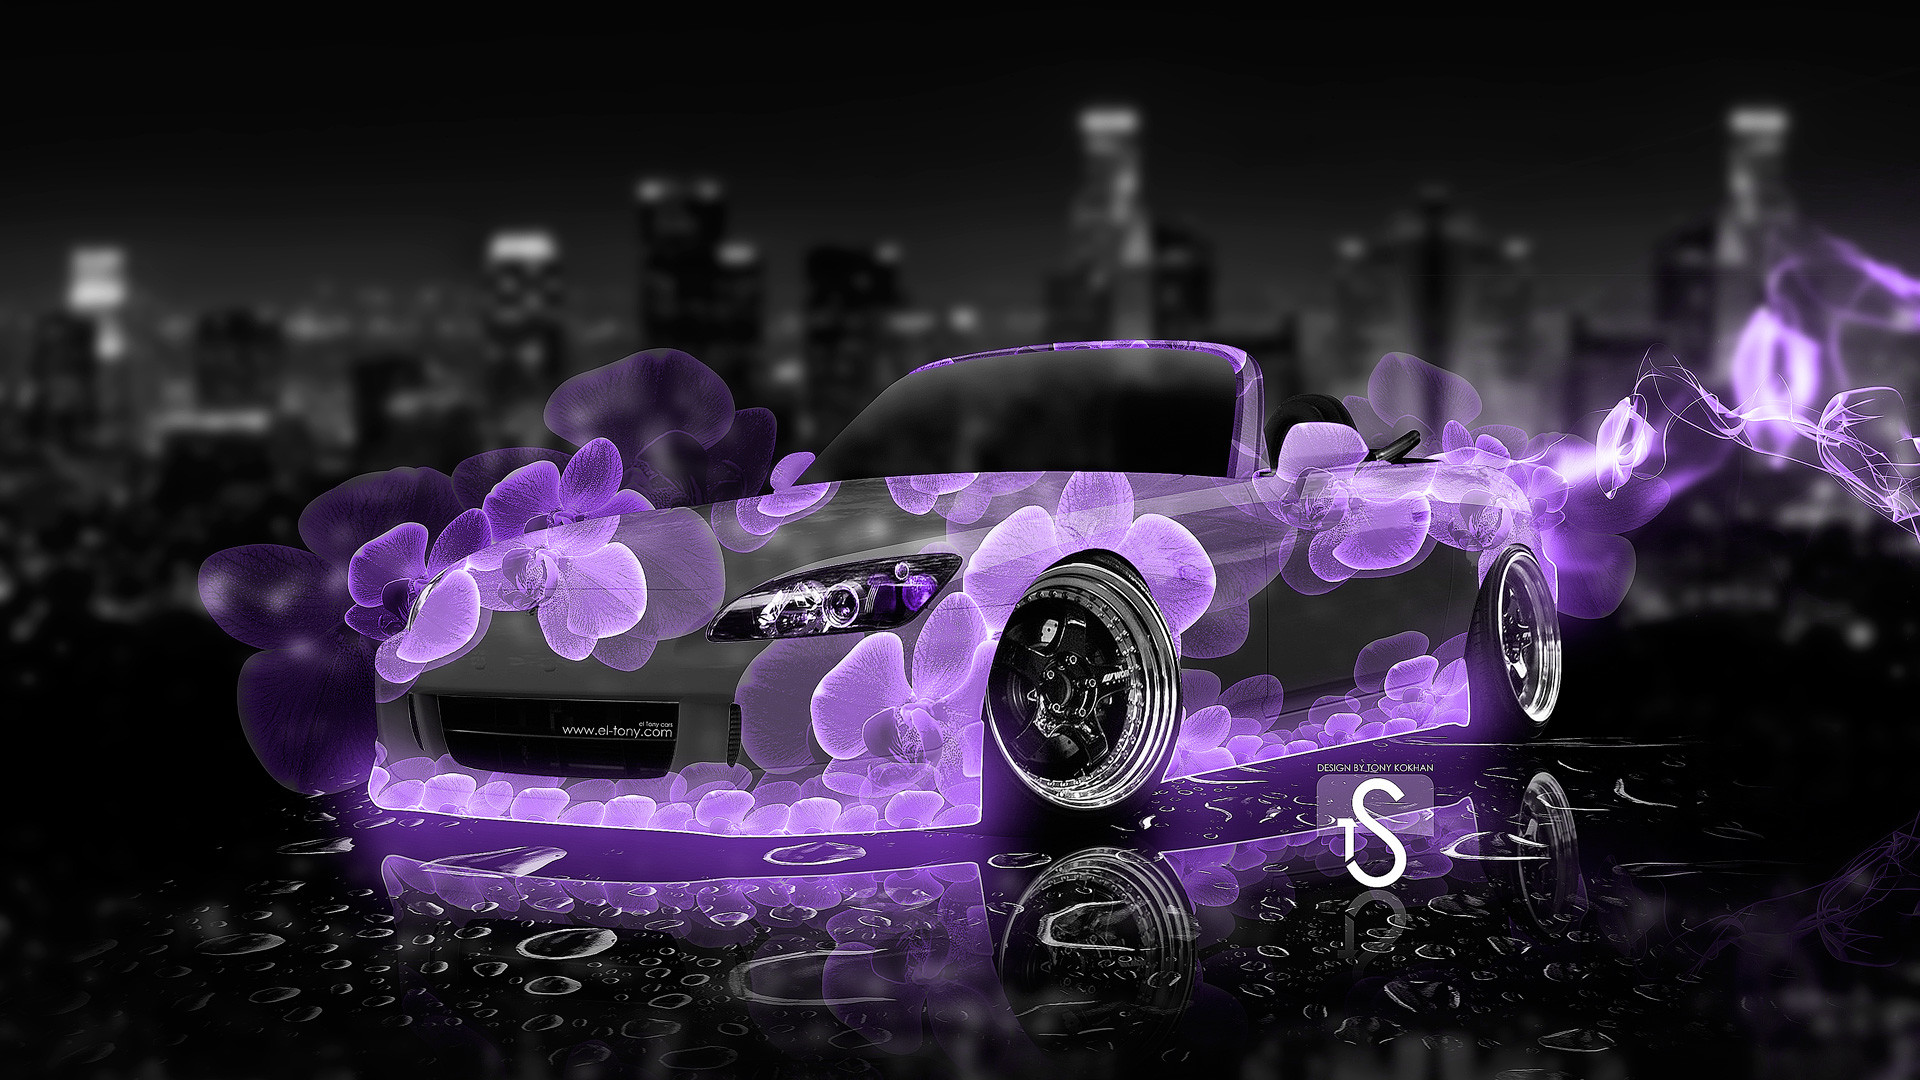 1920x1080 ... Honda-S2000-Violet-Abstract-Flowers-Car-2013-HD-